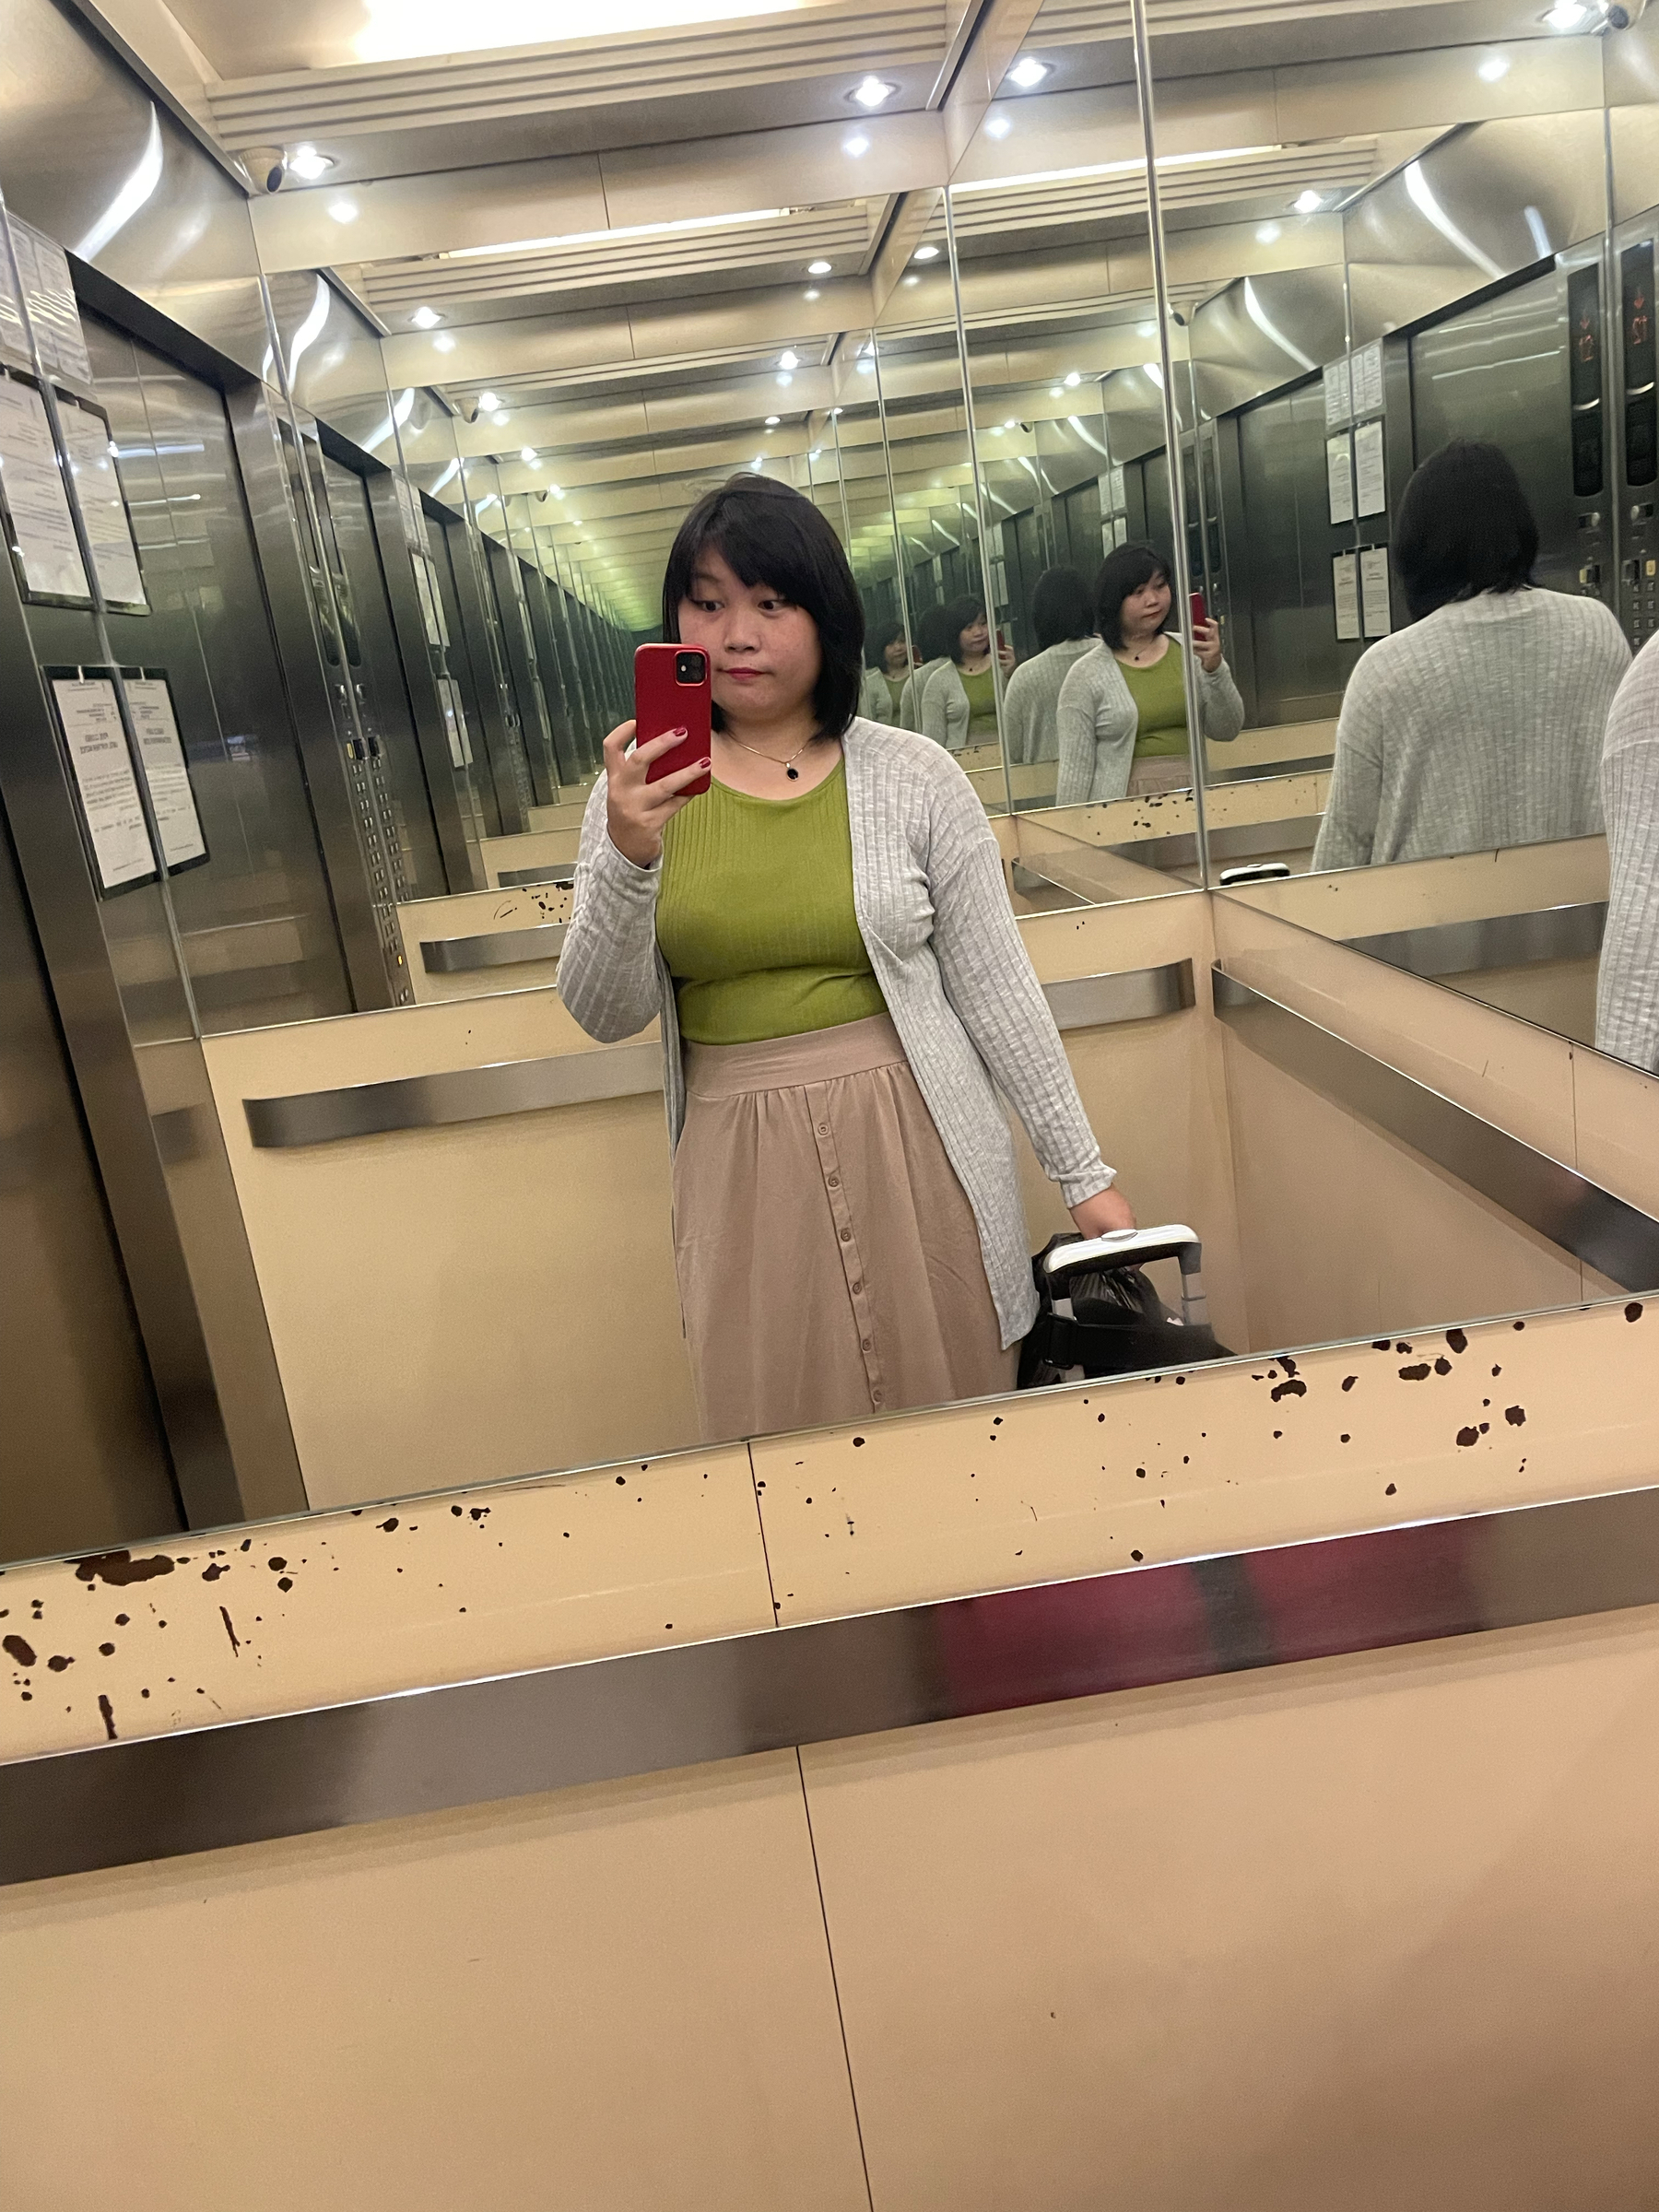 Elevator mirror selfie of Chi showing off her outfit: a green knitted sleeveless top and beige long A-line skirt, and a gray cardigan to complete the look. Seen peeking on the lower right portion of the mirror is her luggage.